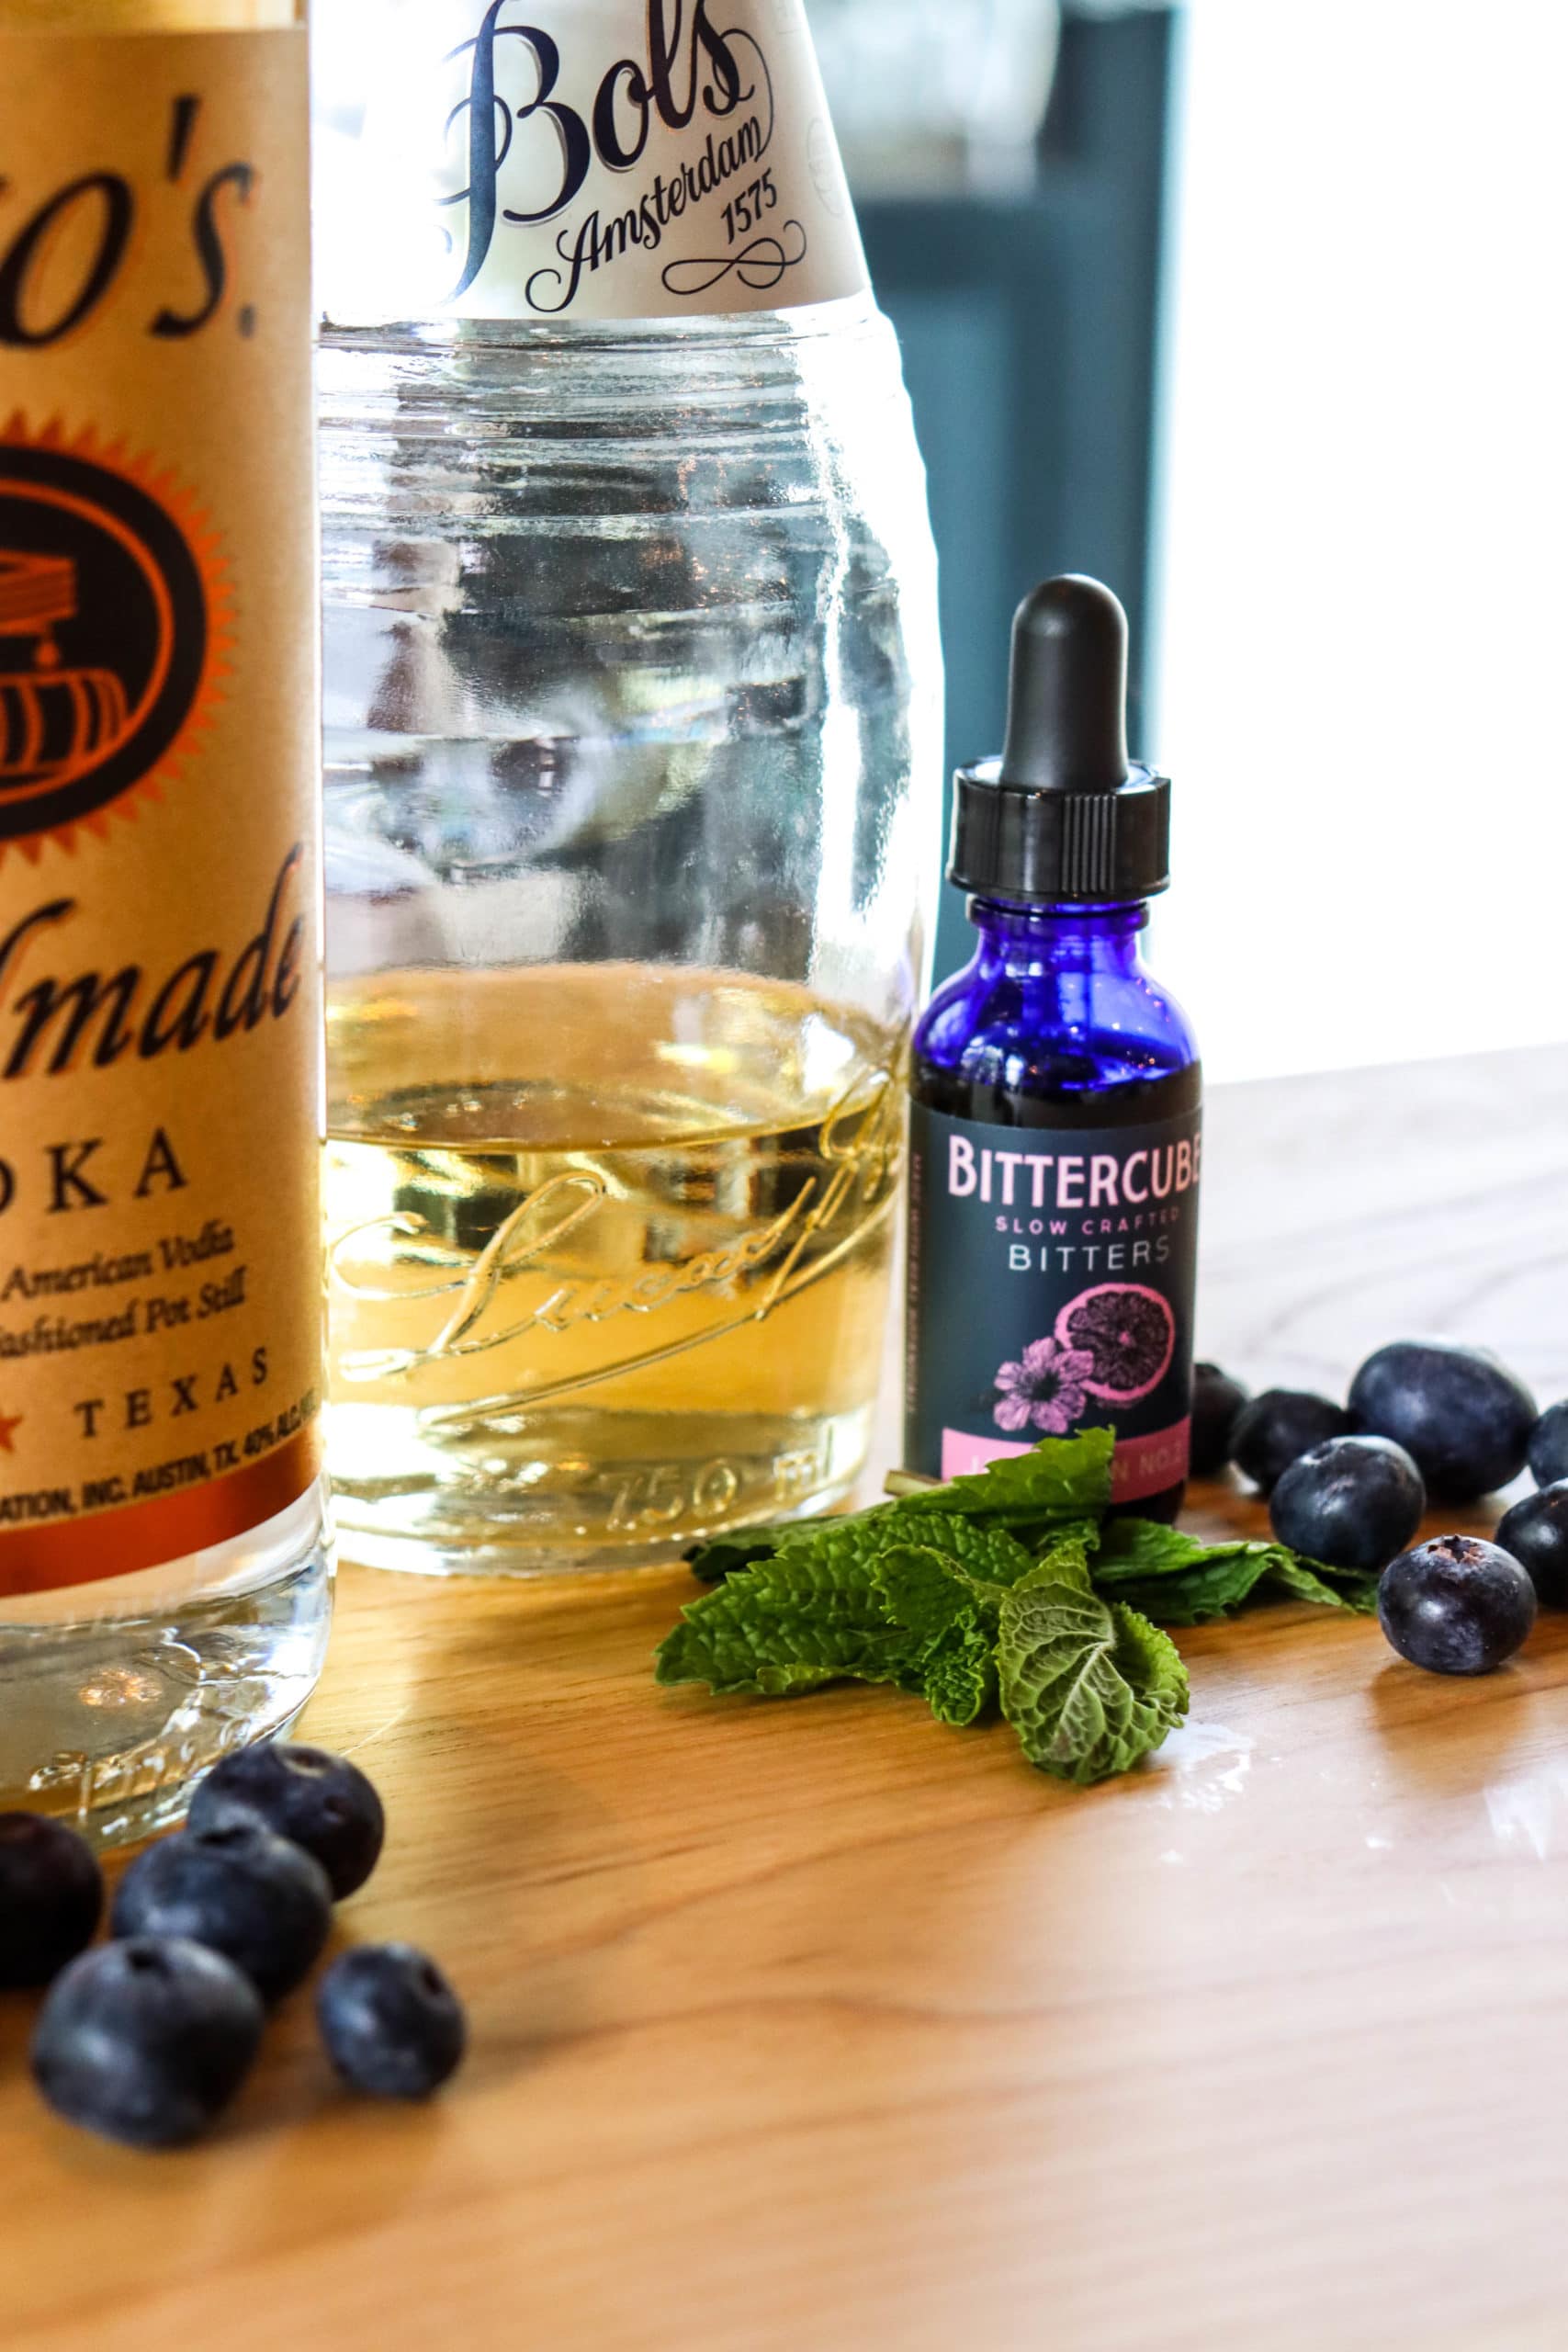 An upclose look on our summer cocktail recipe ingredients.